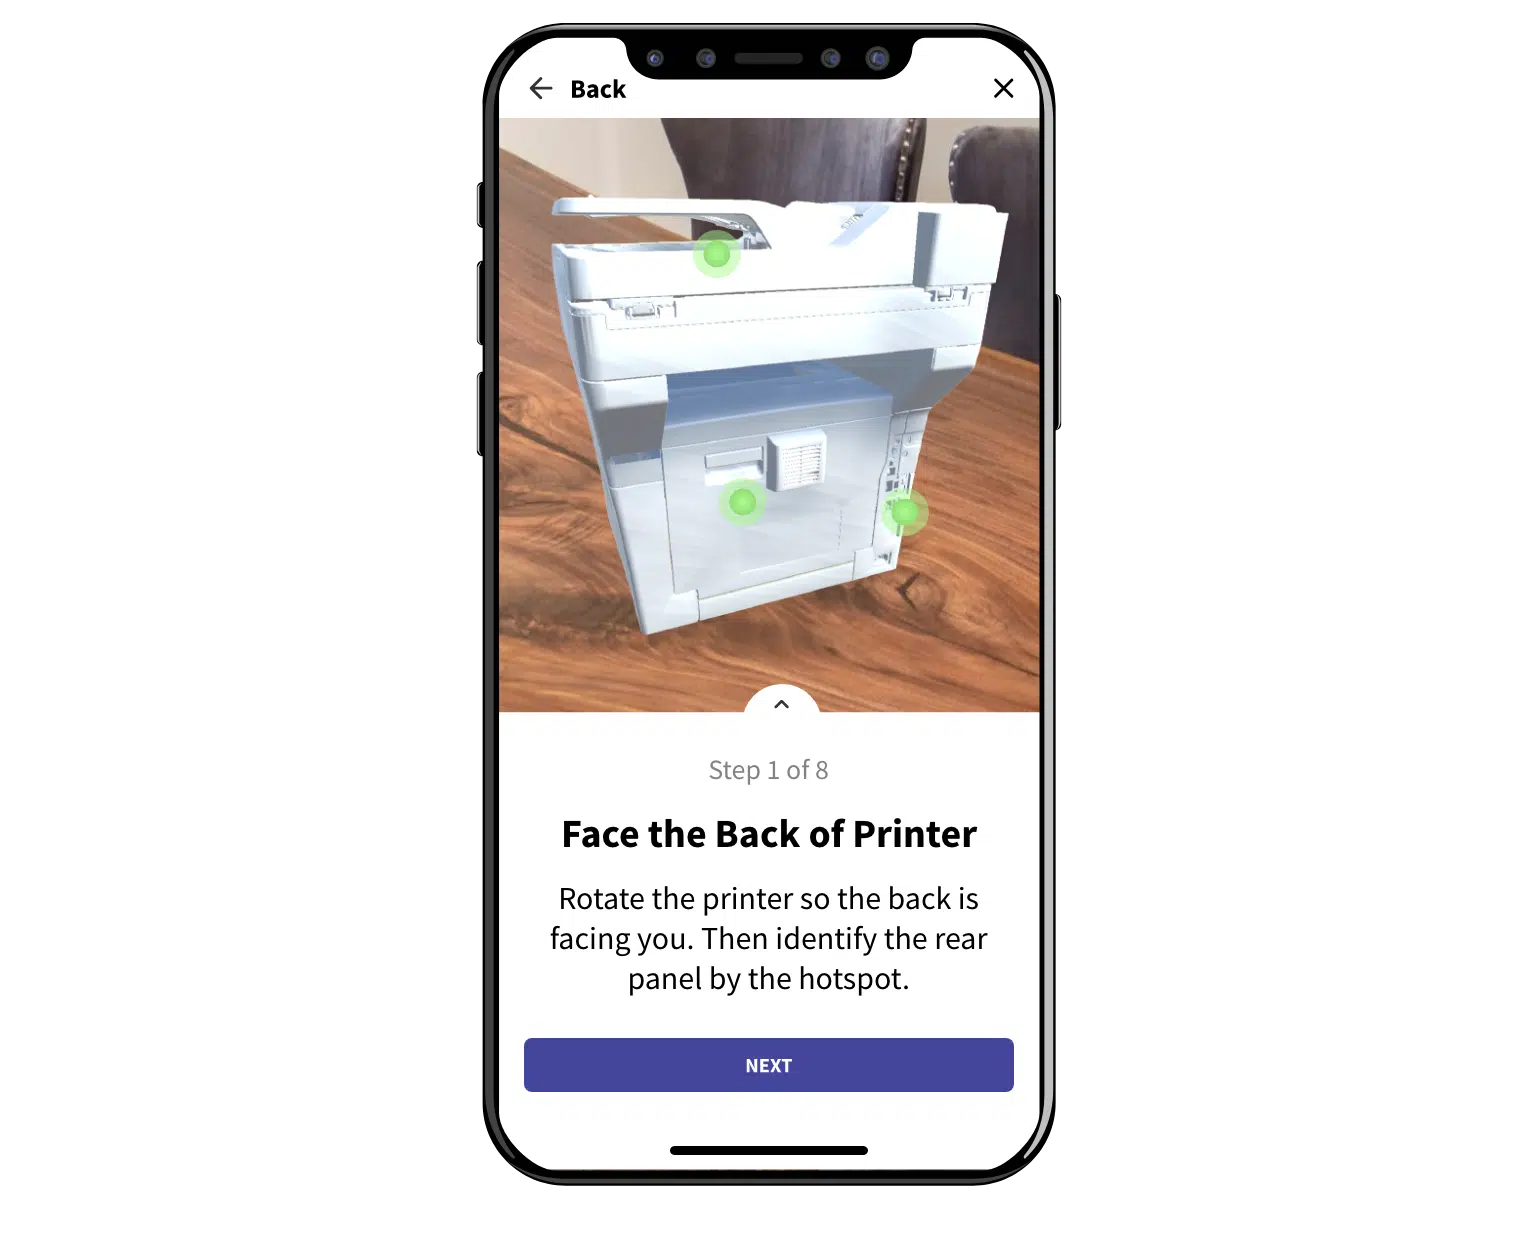 CareAR Instruct for Xerox step-by-step instructions augmented reality